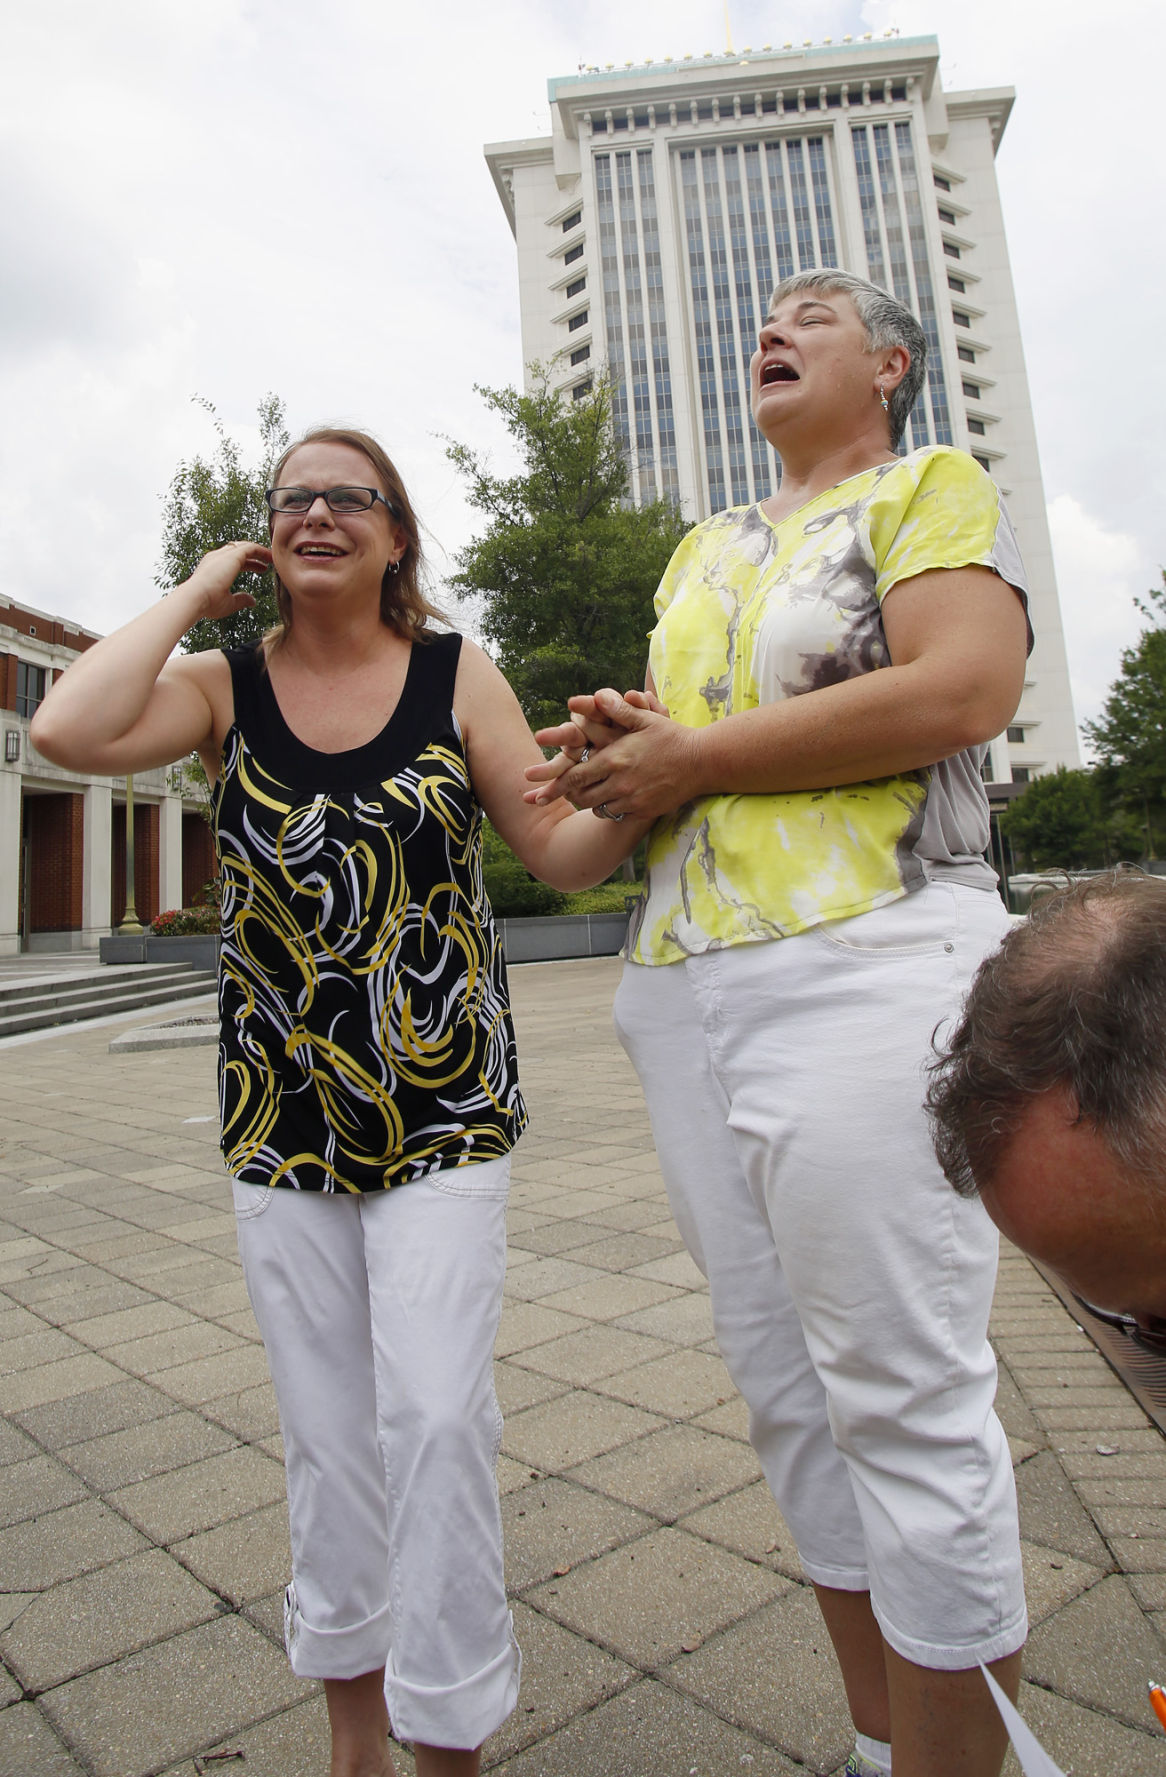 Same-sex couples can marry in Lee County; Alabama probate judges are still divided